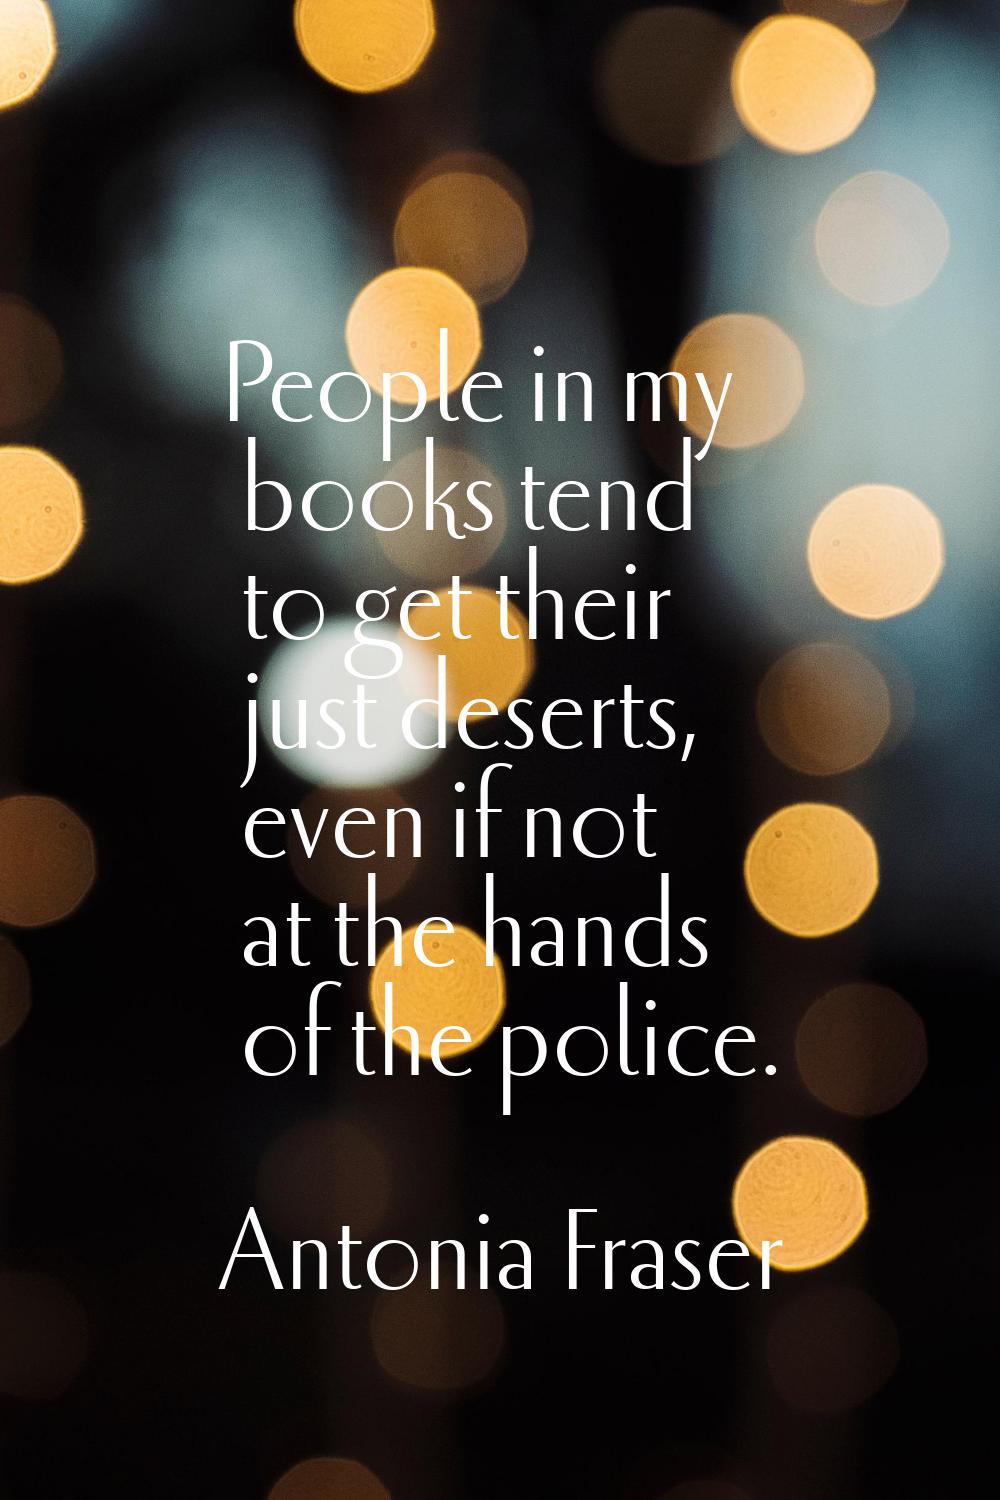 People in my books tend to get their just deserts, even if not at the hands of the police.